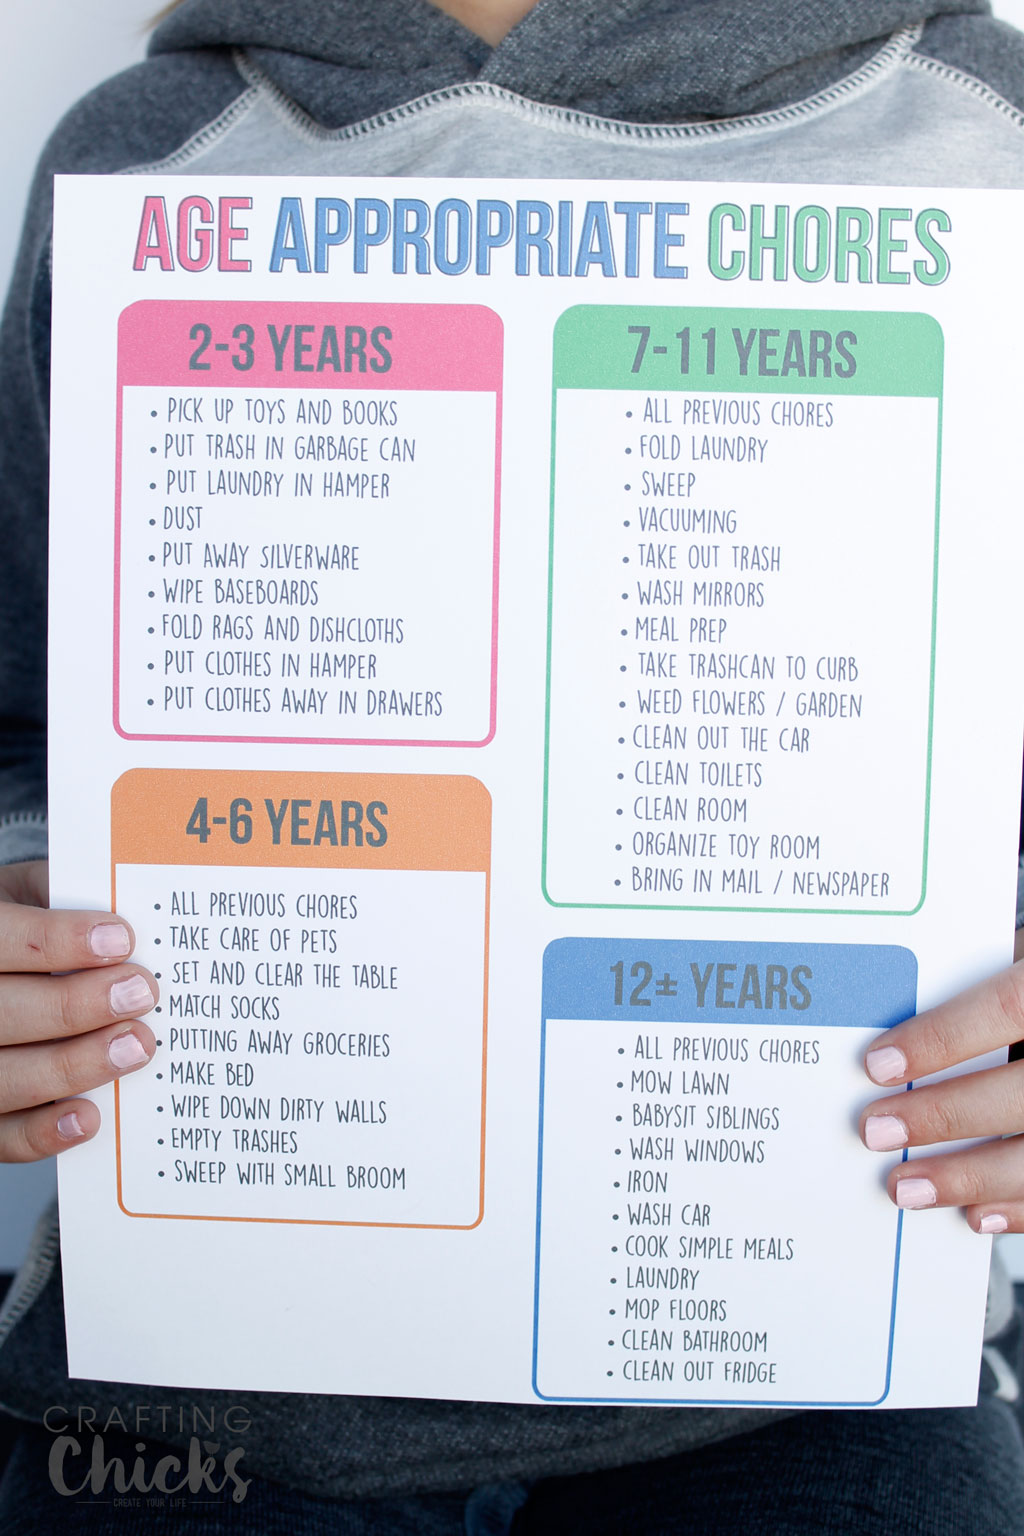 Age appropriate chores printable list being held by a child.